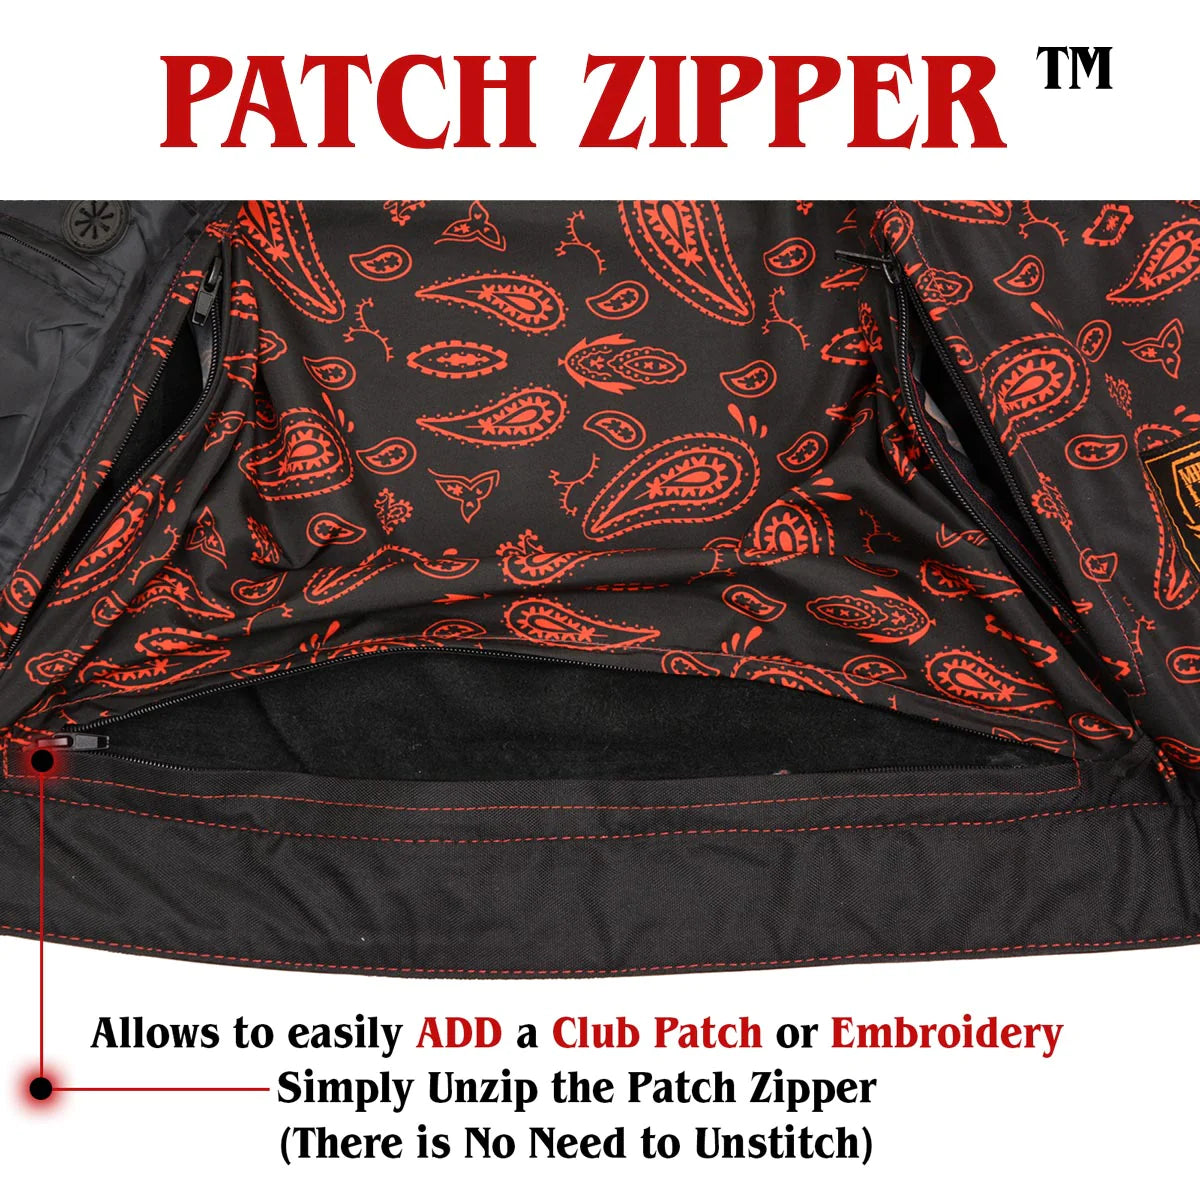 Men's Black 'Paisley' Accented Red Stitching Leather Vest – w/ Armhole Trim Open Collar Design